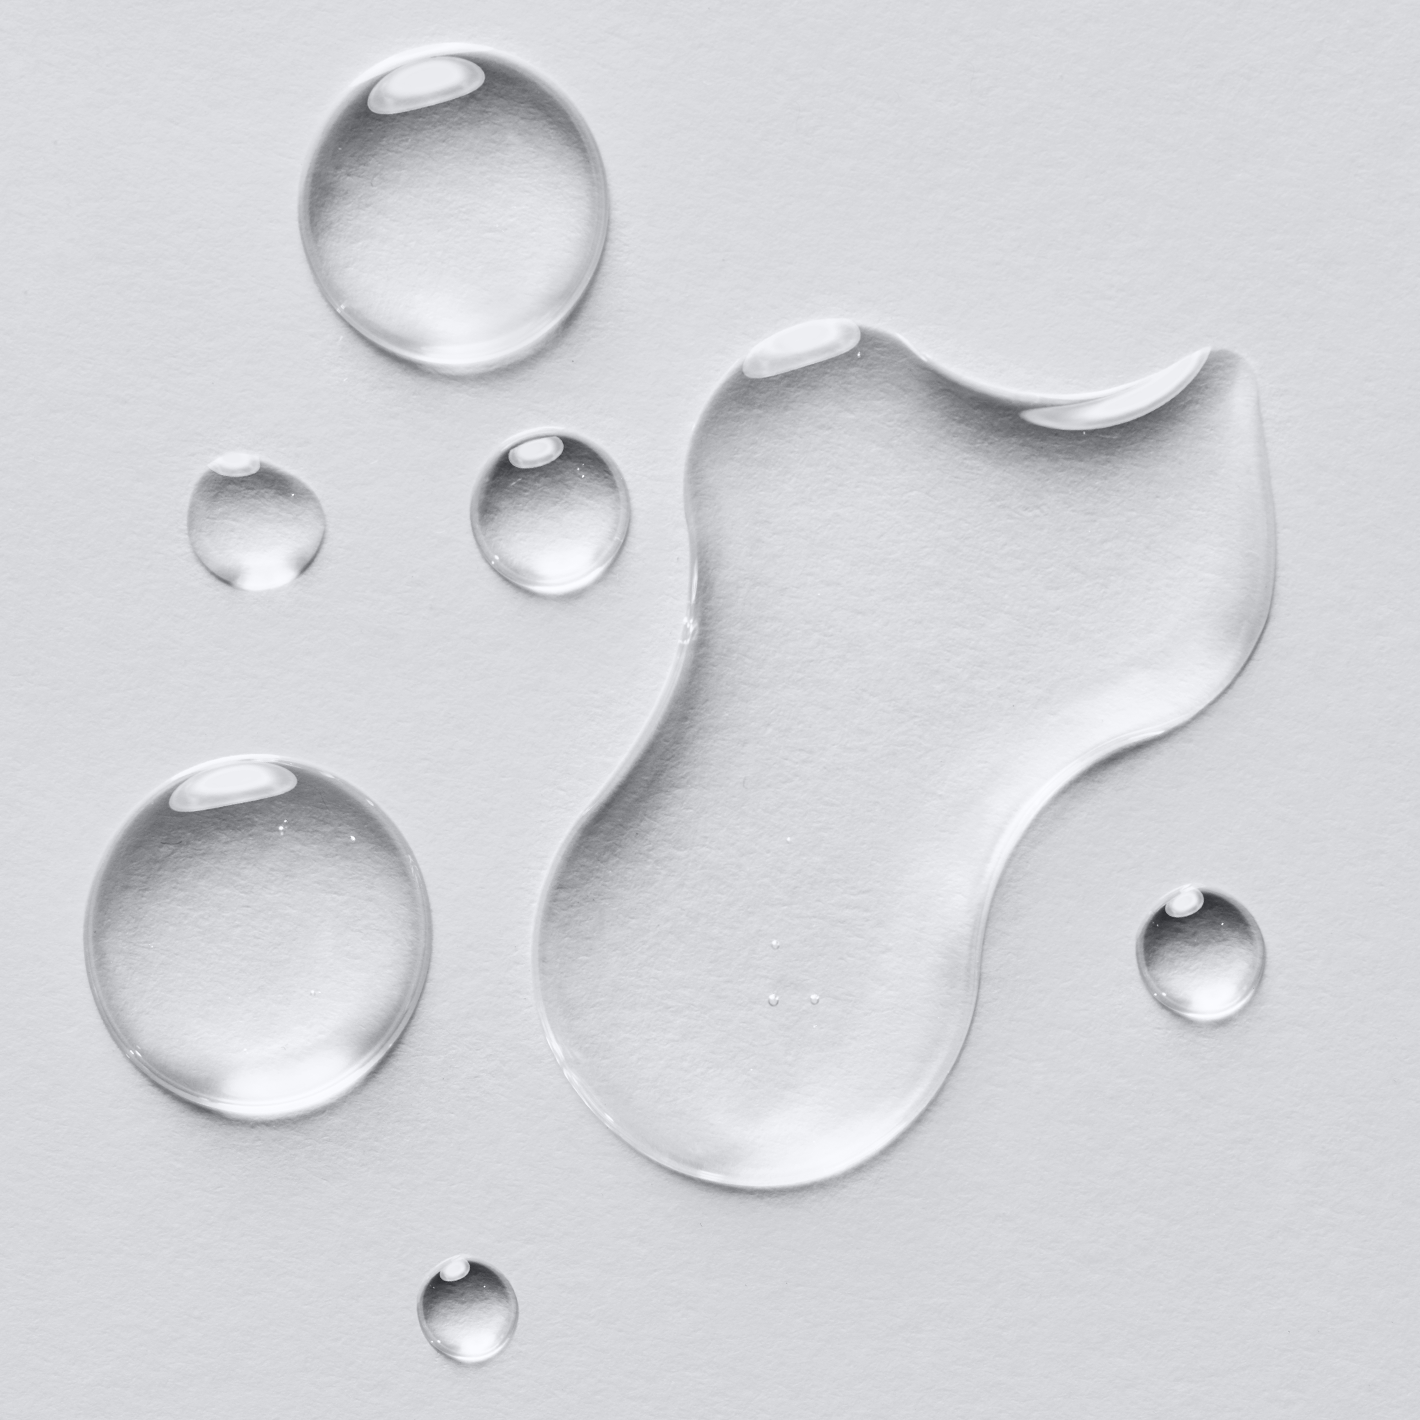 drops of water on a white surface.